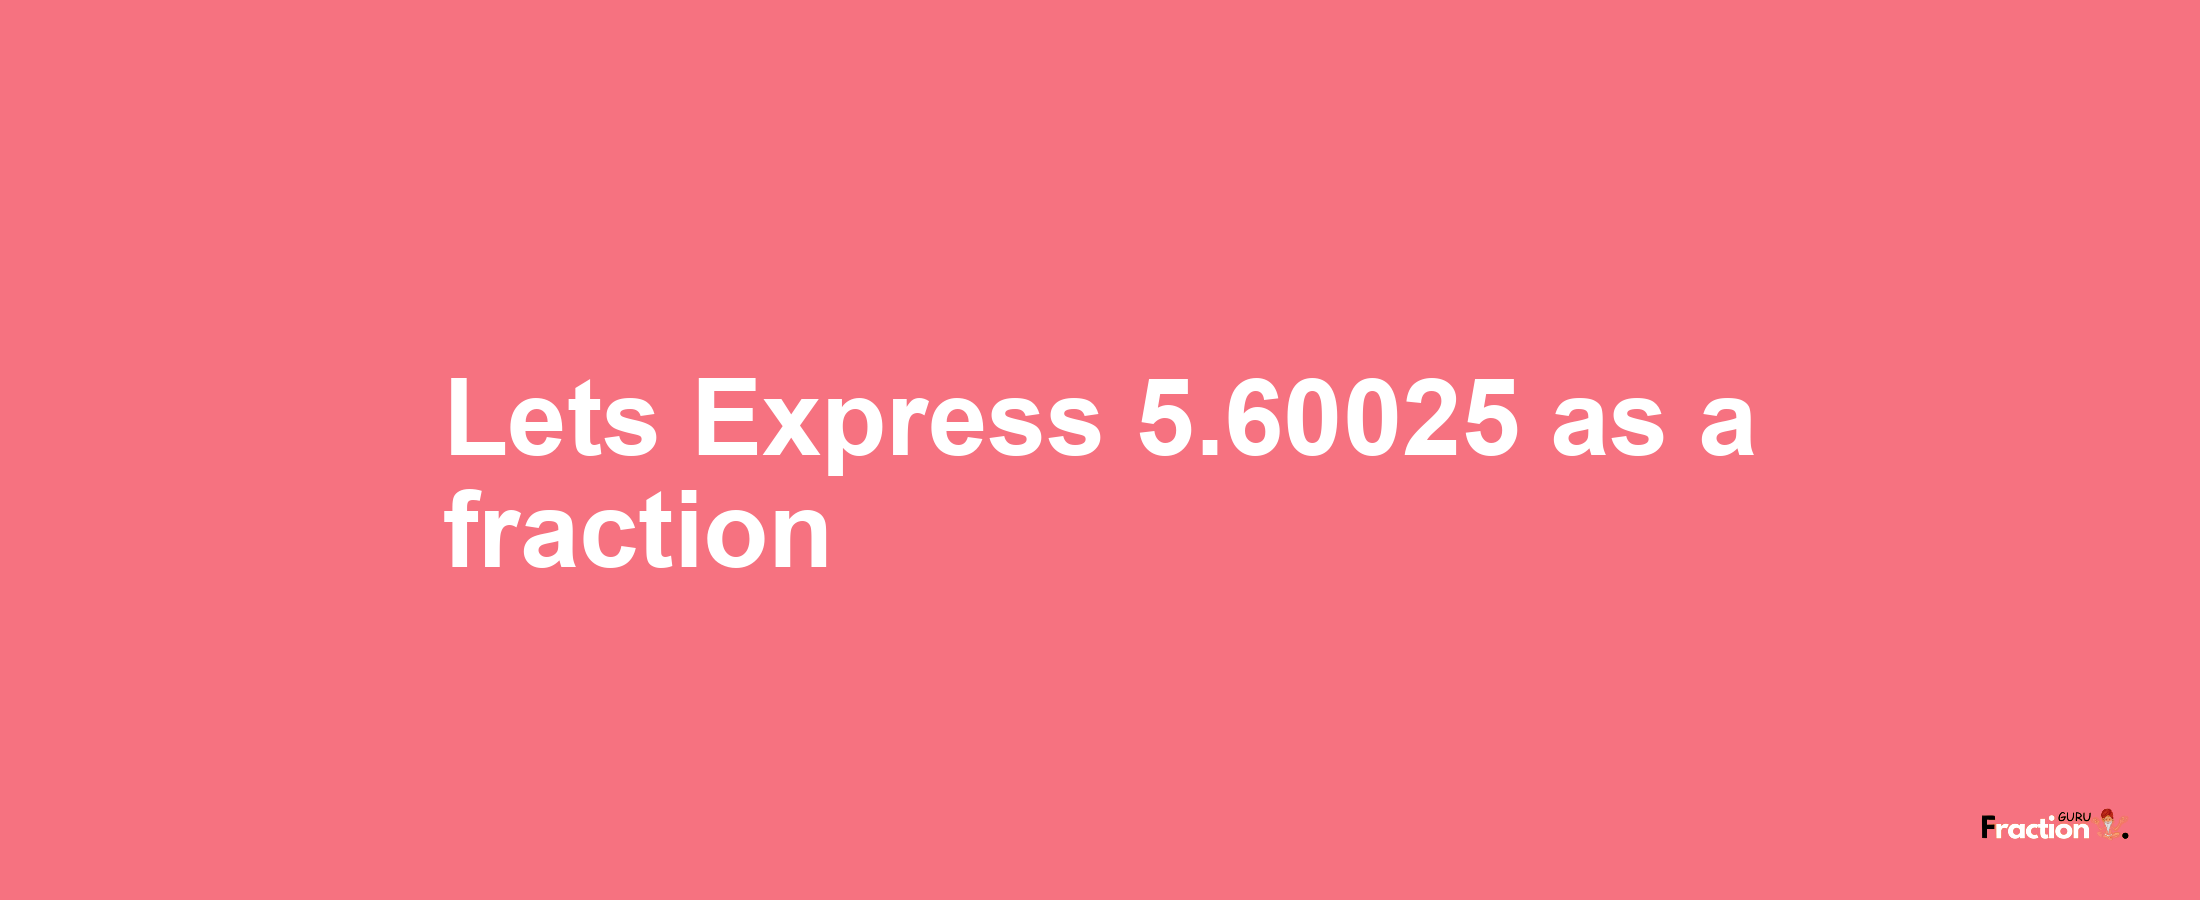 Lets Express 5.60025 as afraction